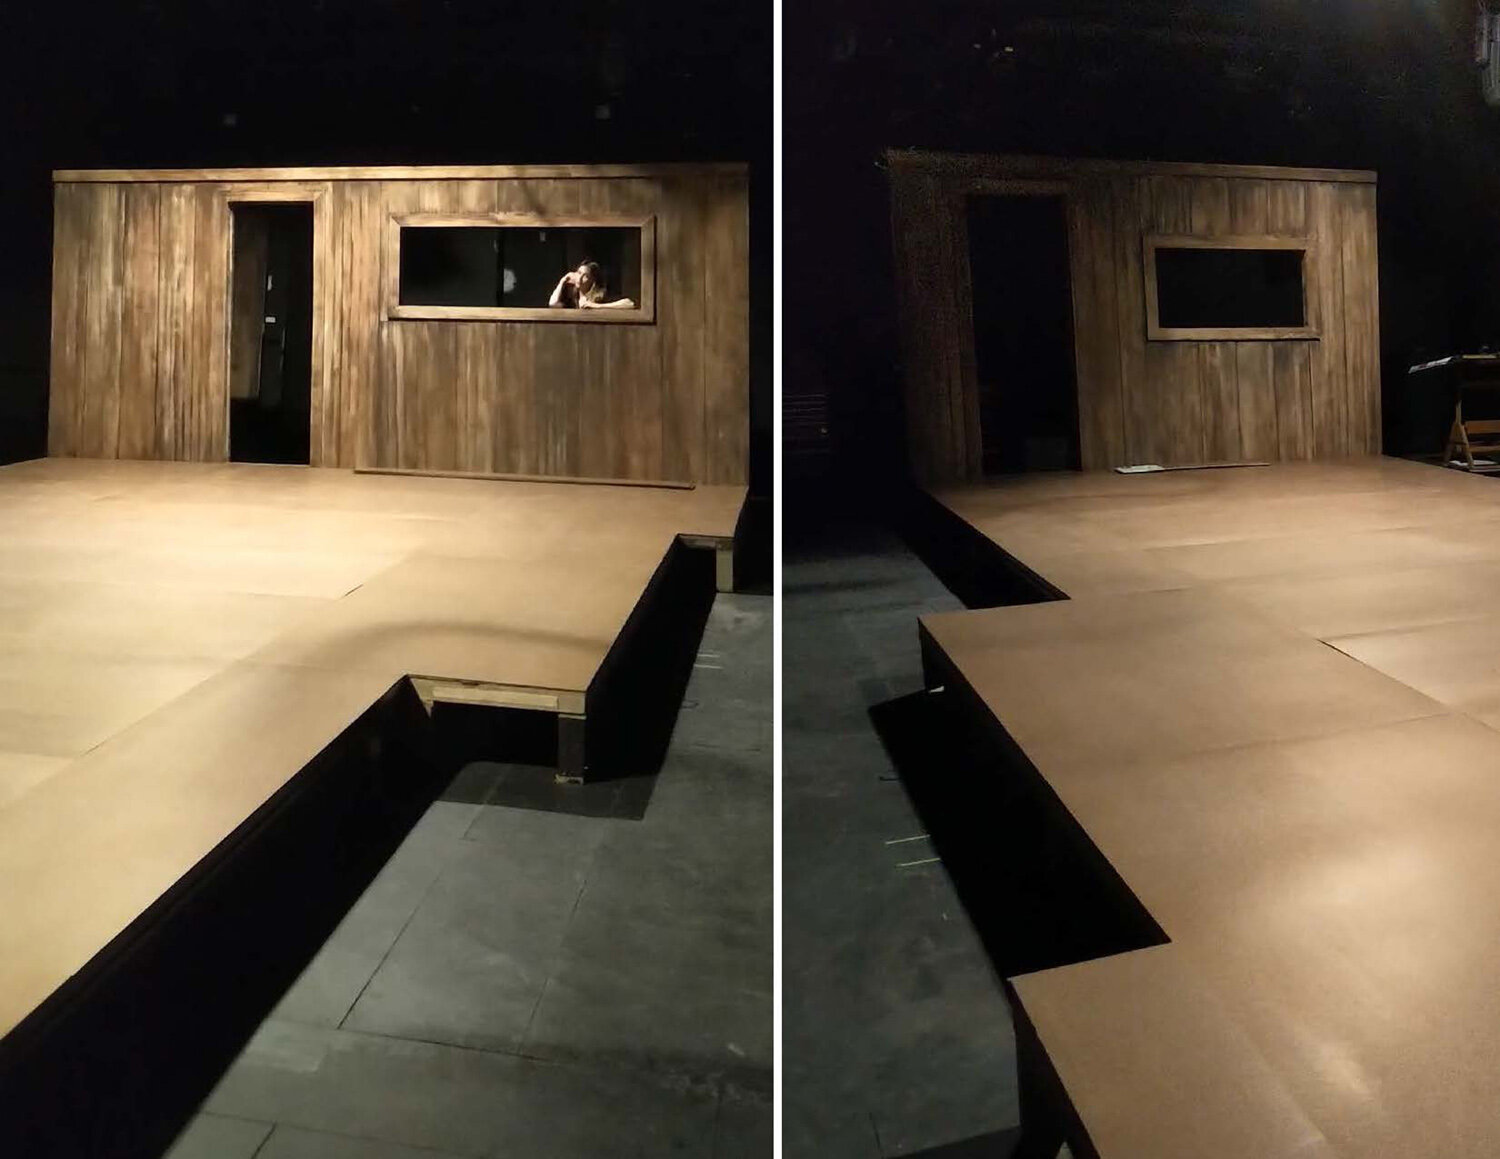 4 Amy Gallacher - Small Mouth Sounds - theater - set design.jpg